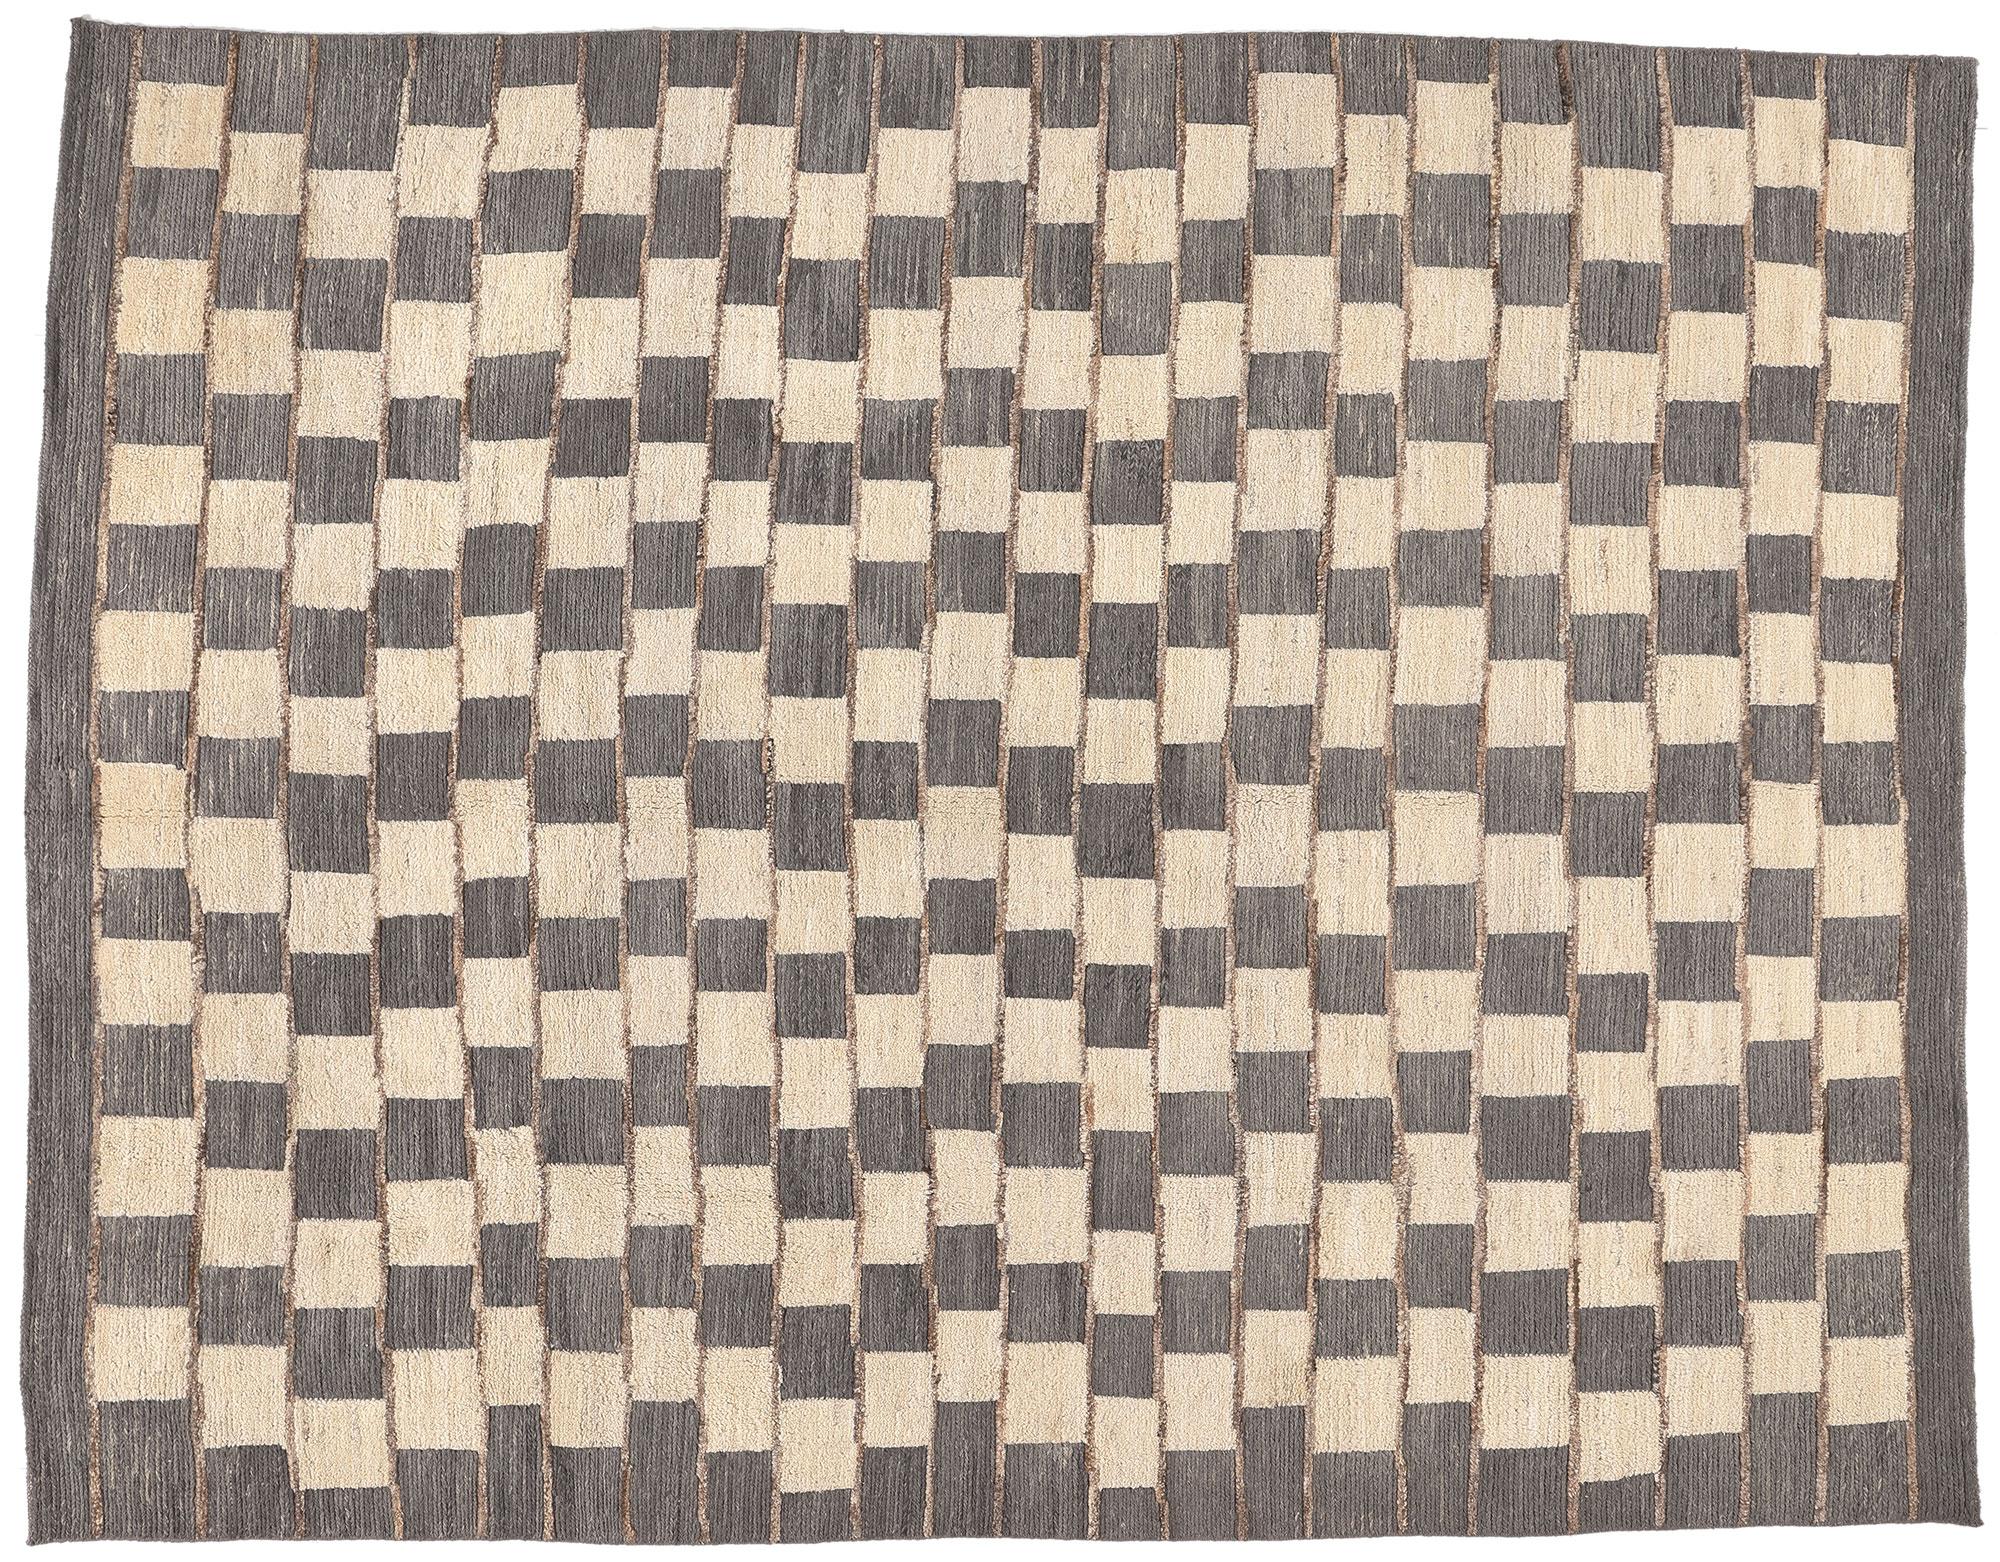 neutral textured rugs